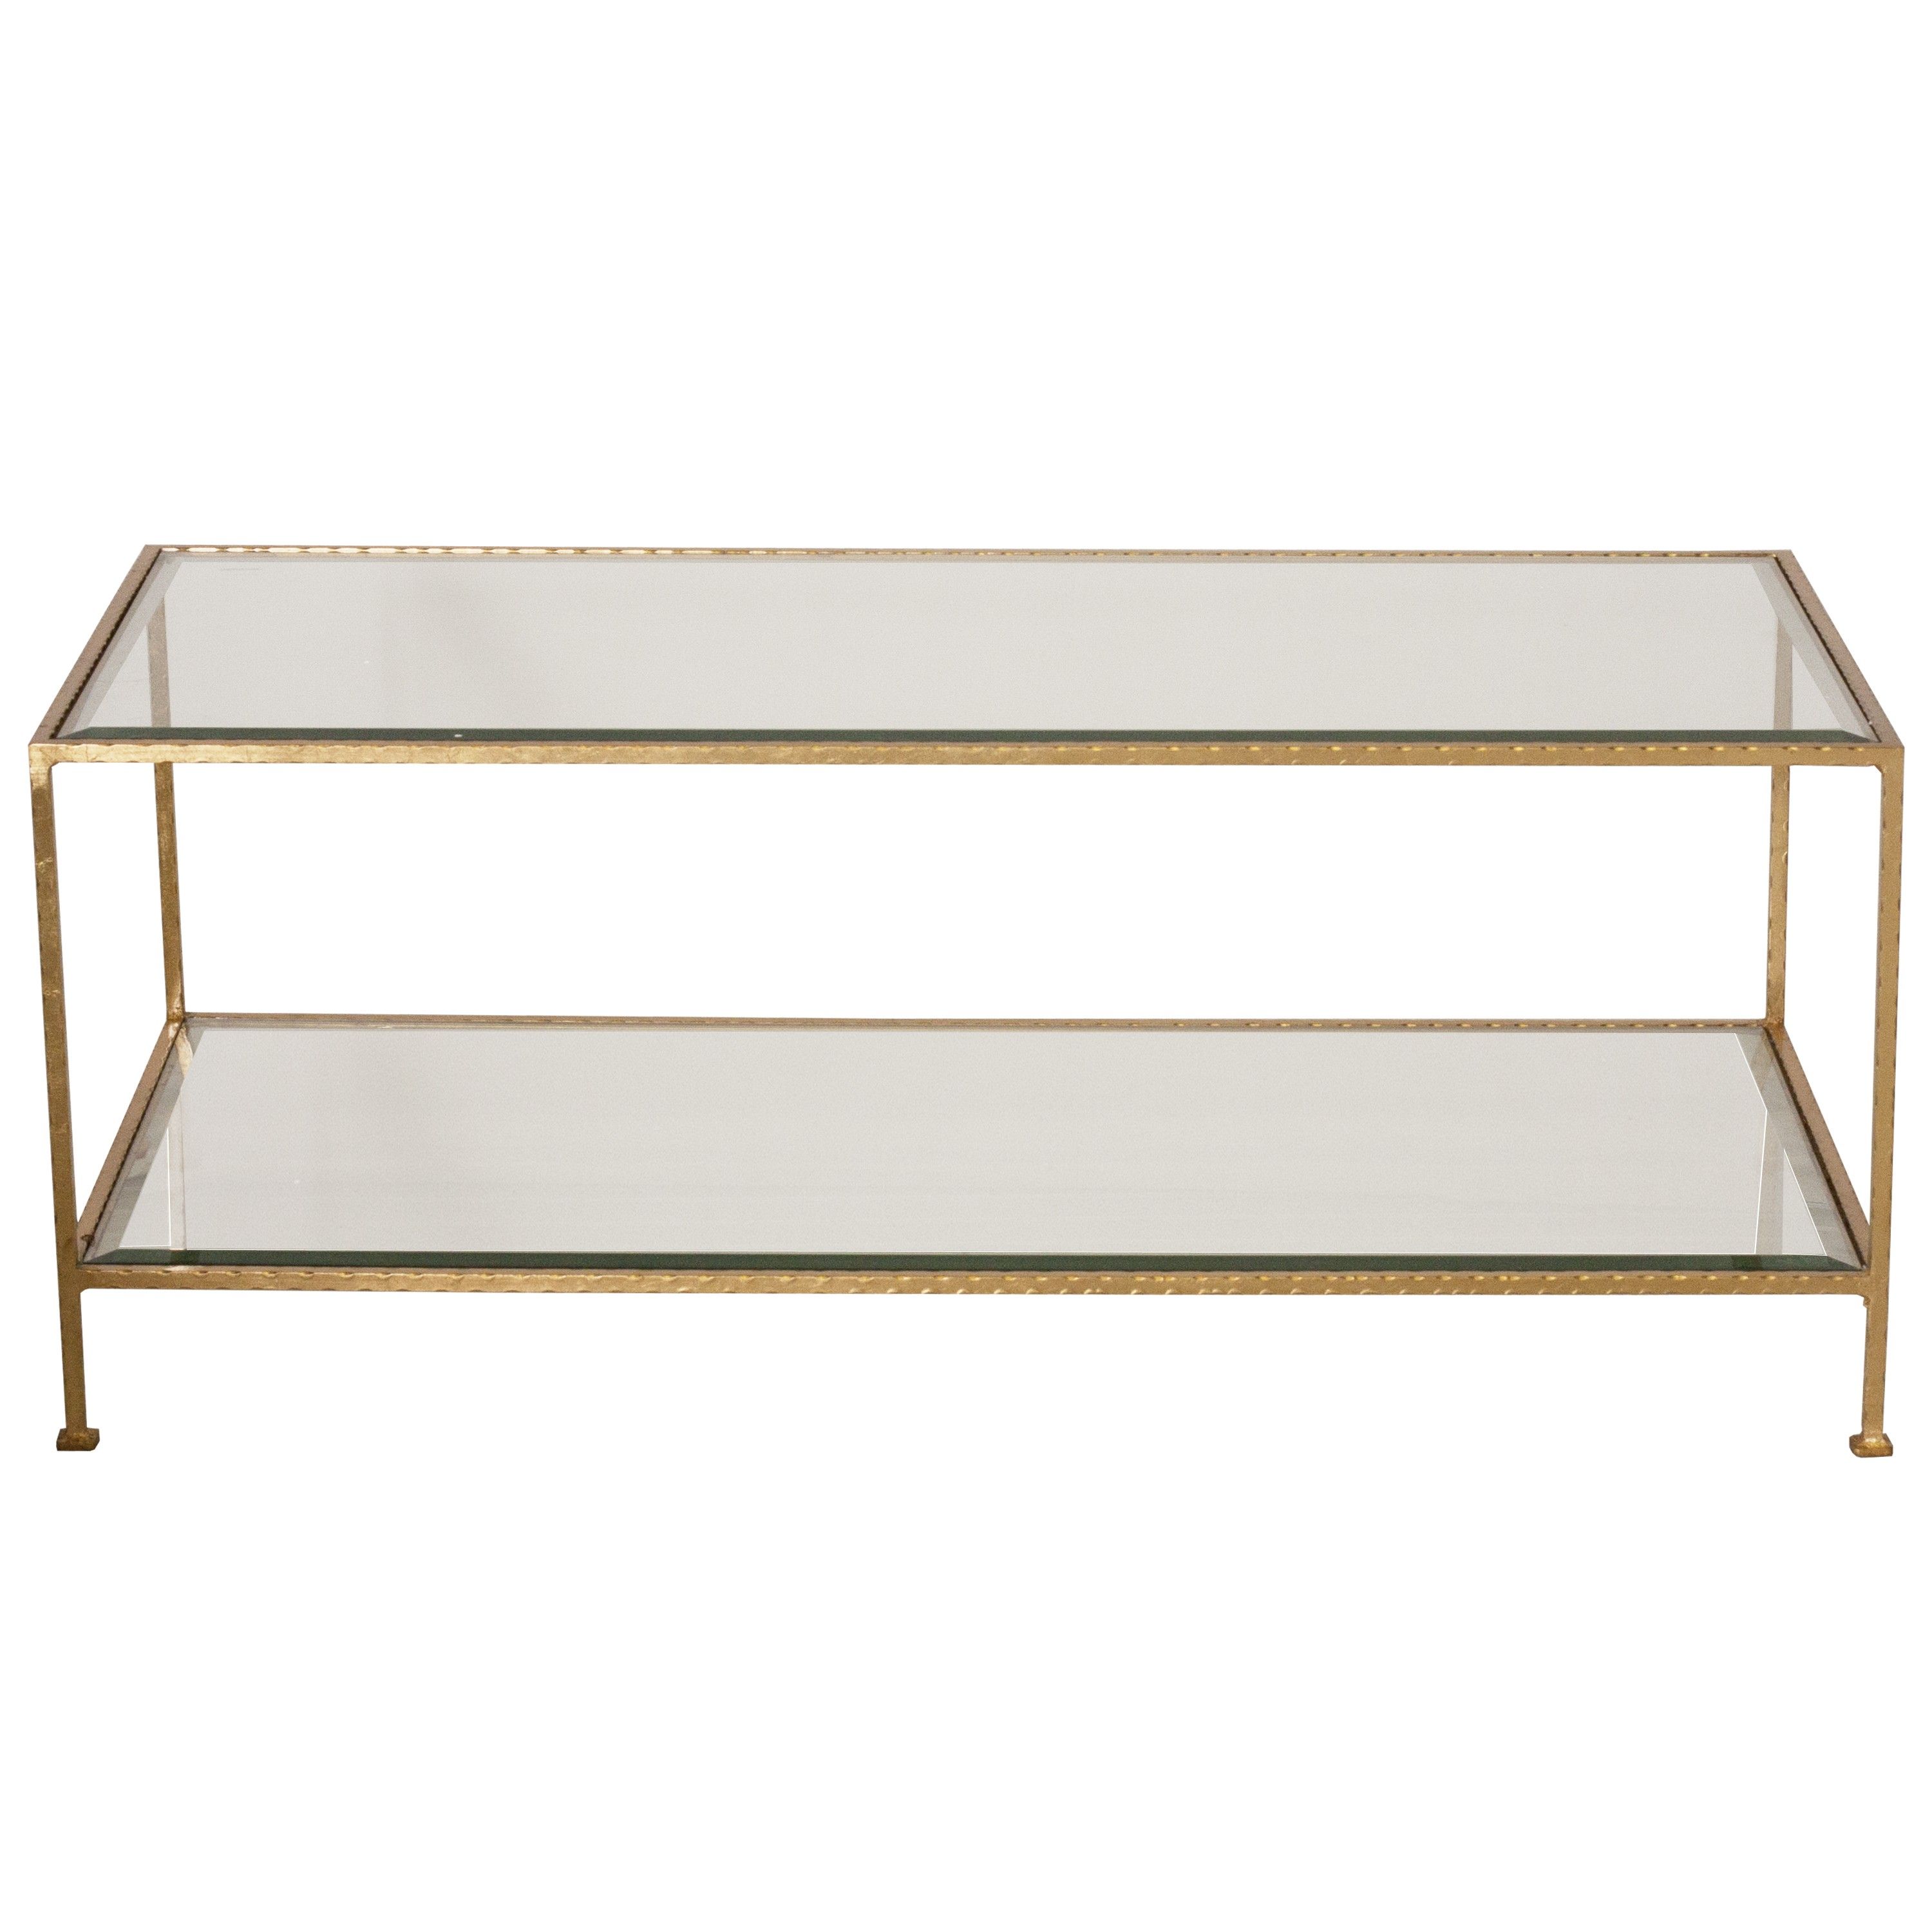 Gold And Glass Coffee Table Hammered Gold Leaf Rectangular Coffee Table With Beveled Glass Shelves (View 4 of 10)